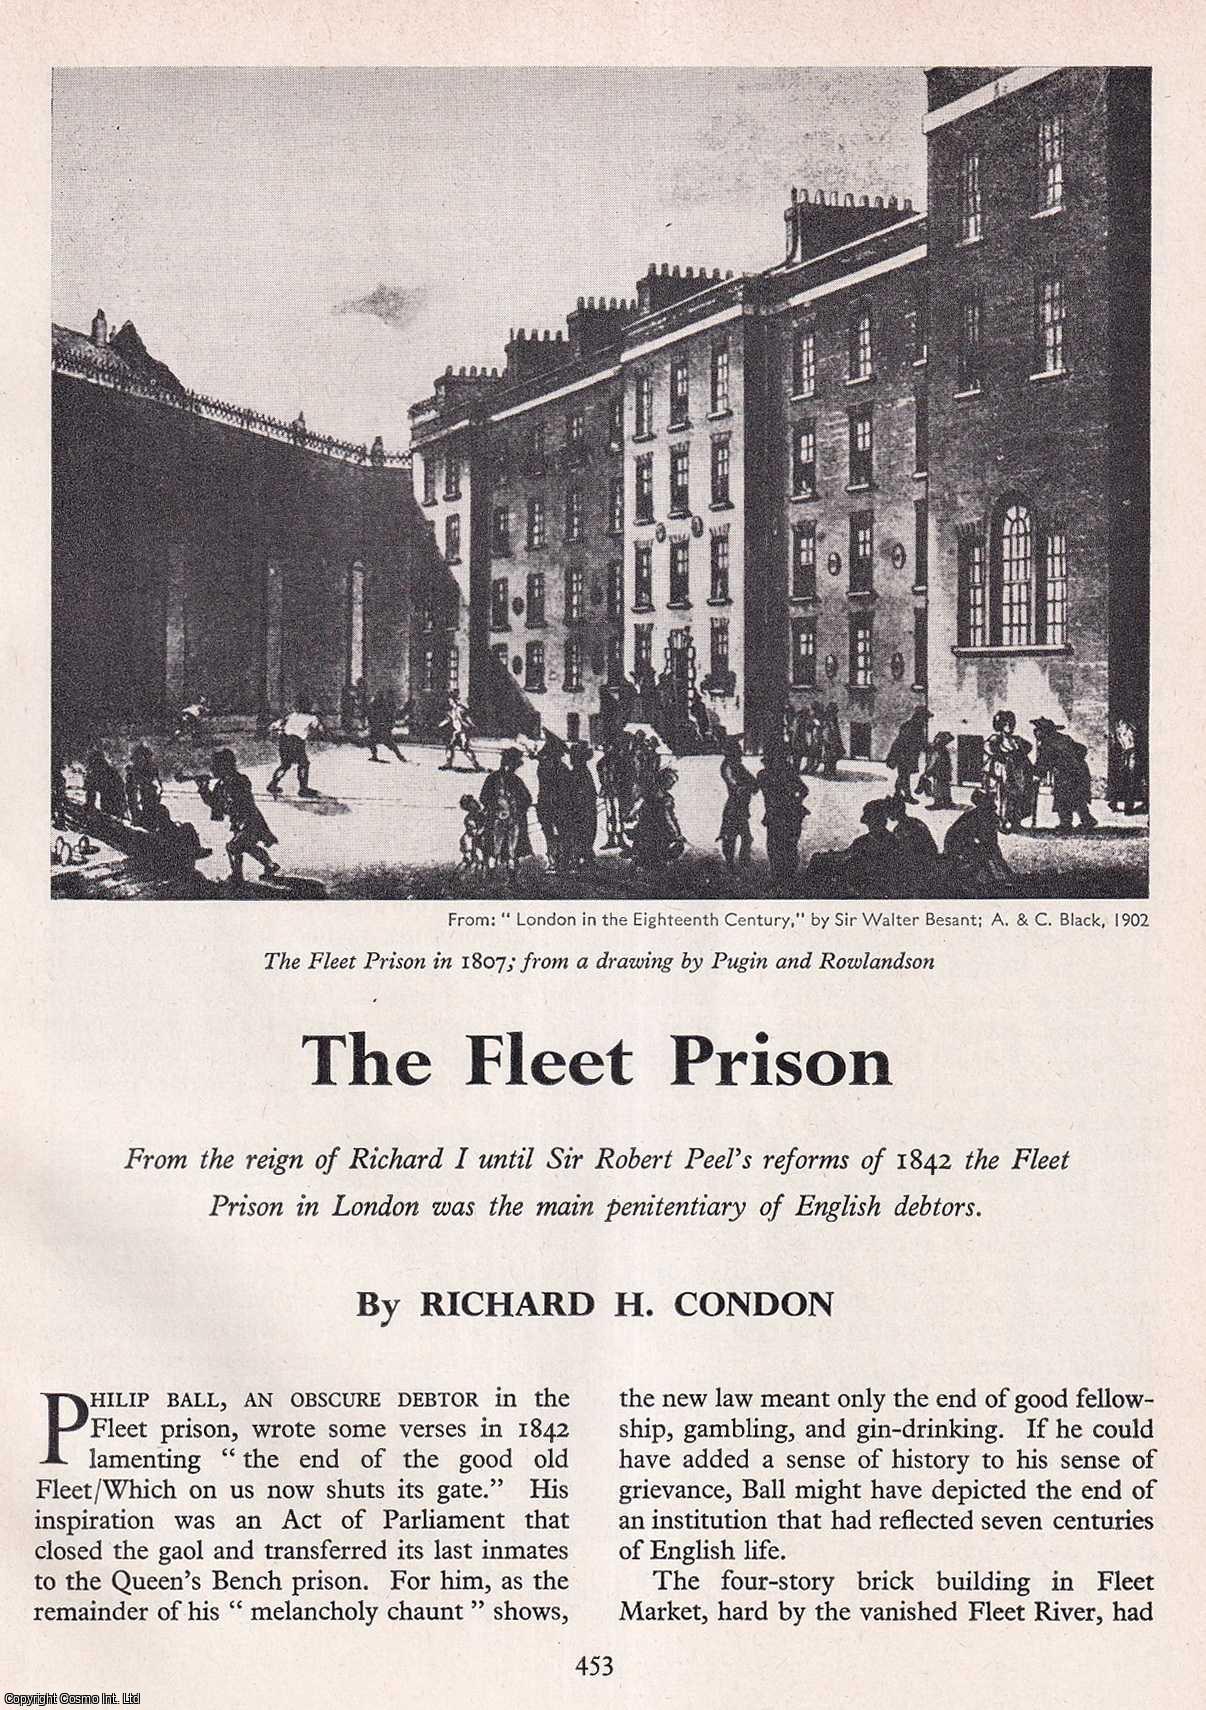 Richard H. Condon - The Fleet Prison London. An original article from History Today magazine, 1964.